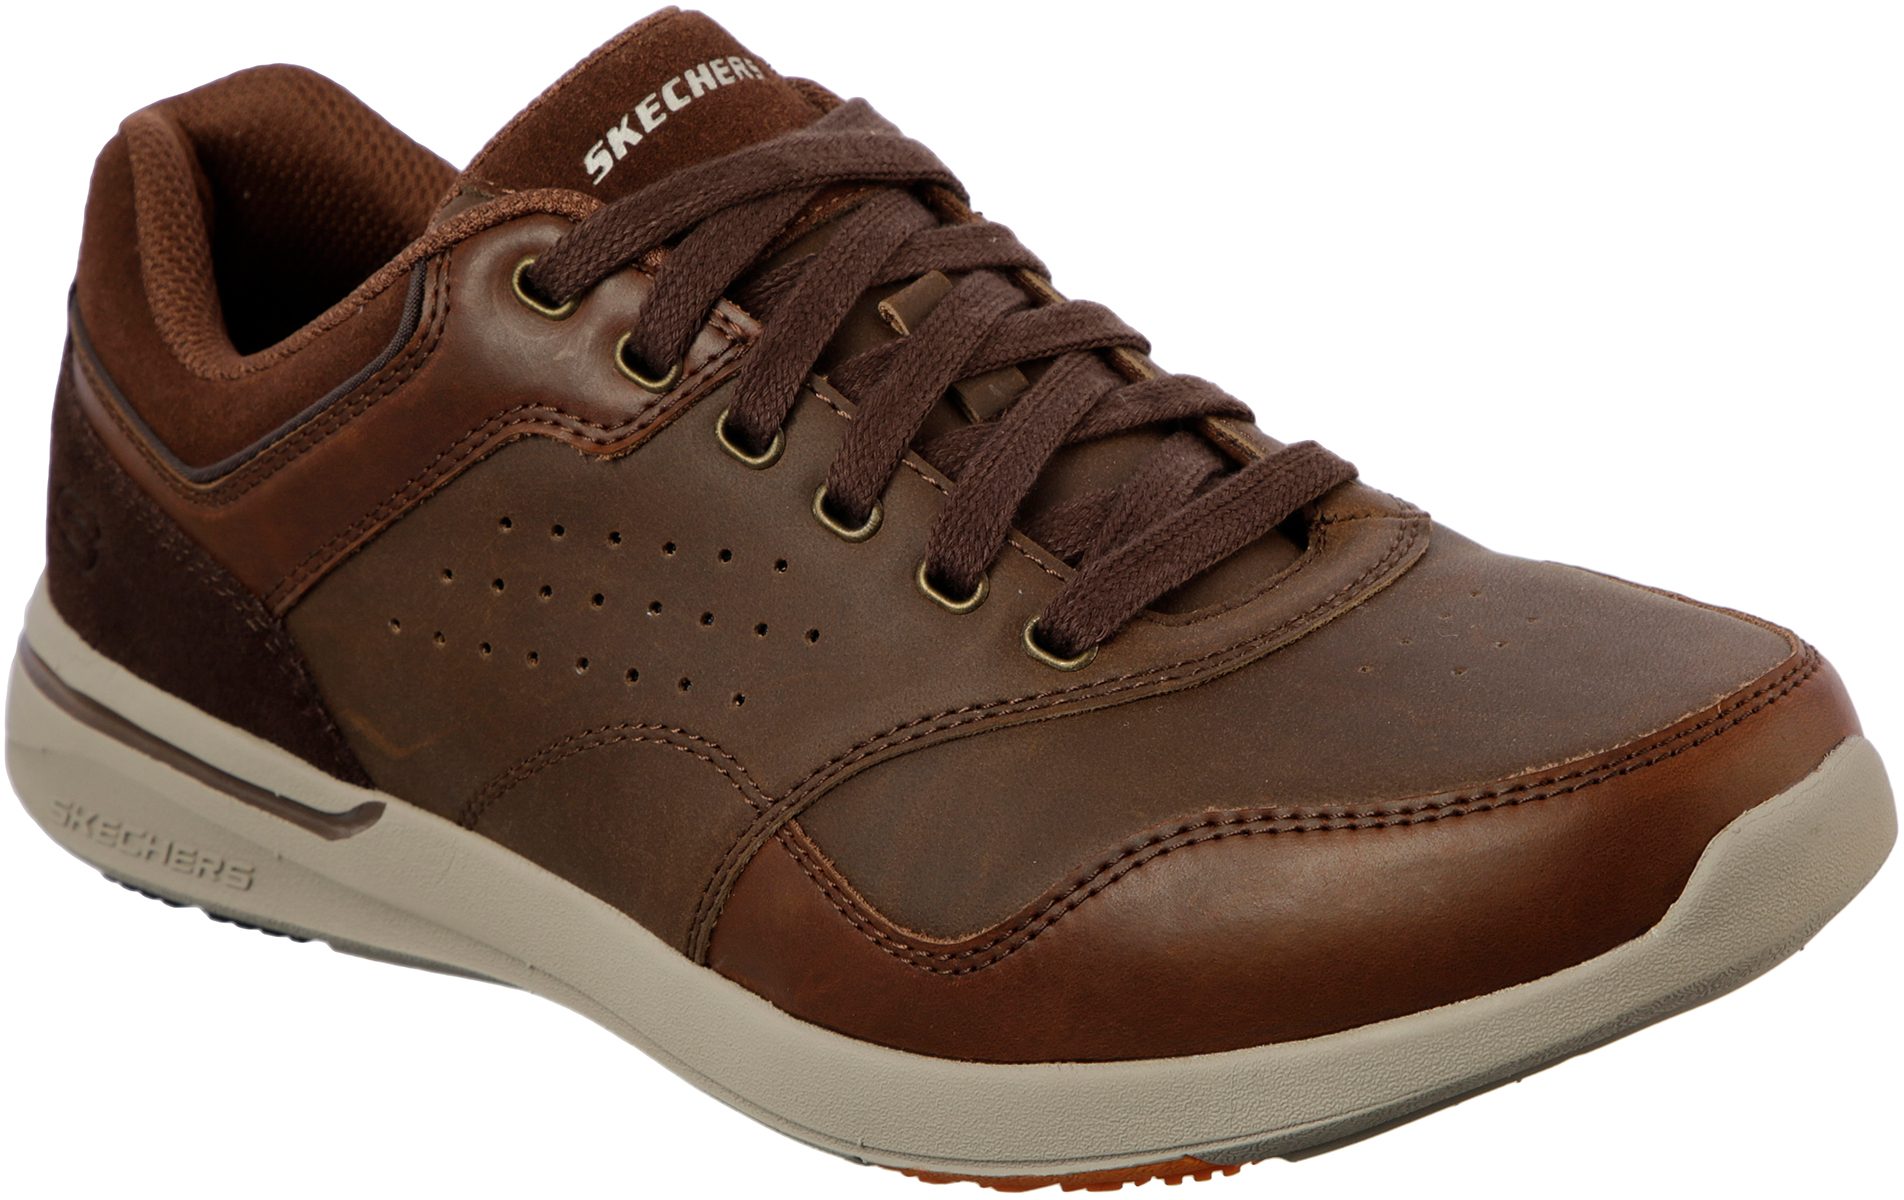 Skechers Relaxed Fit: Elent - 65406 - Casual Shoes - Shoes